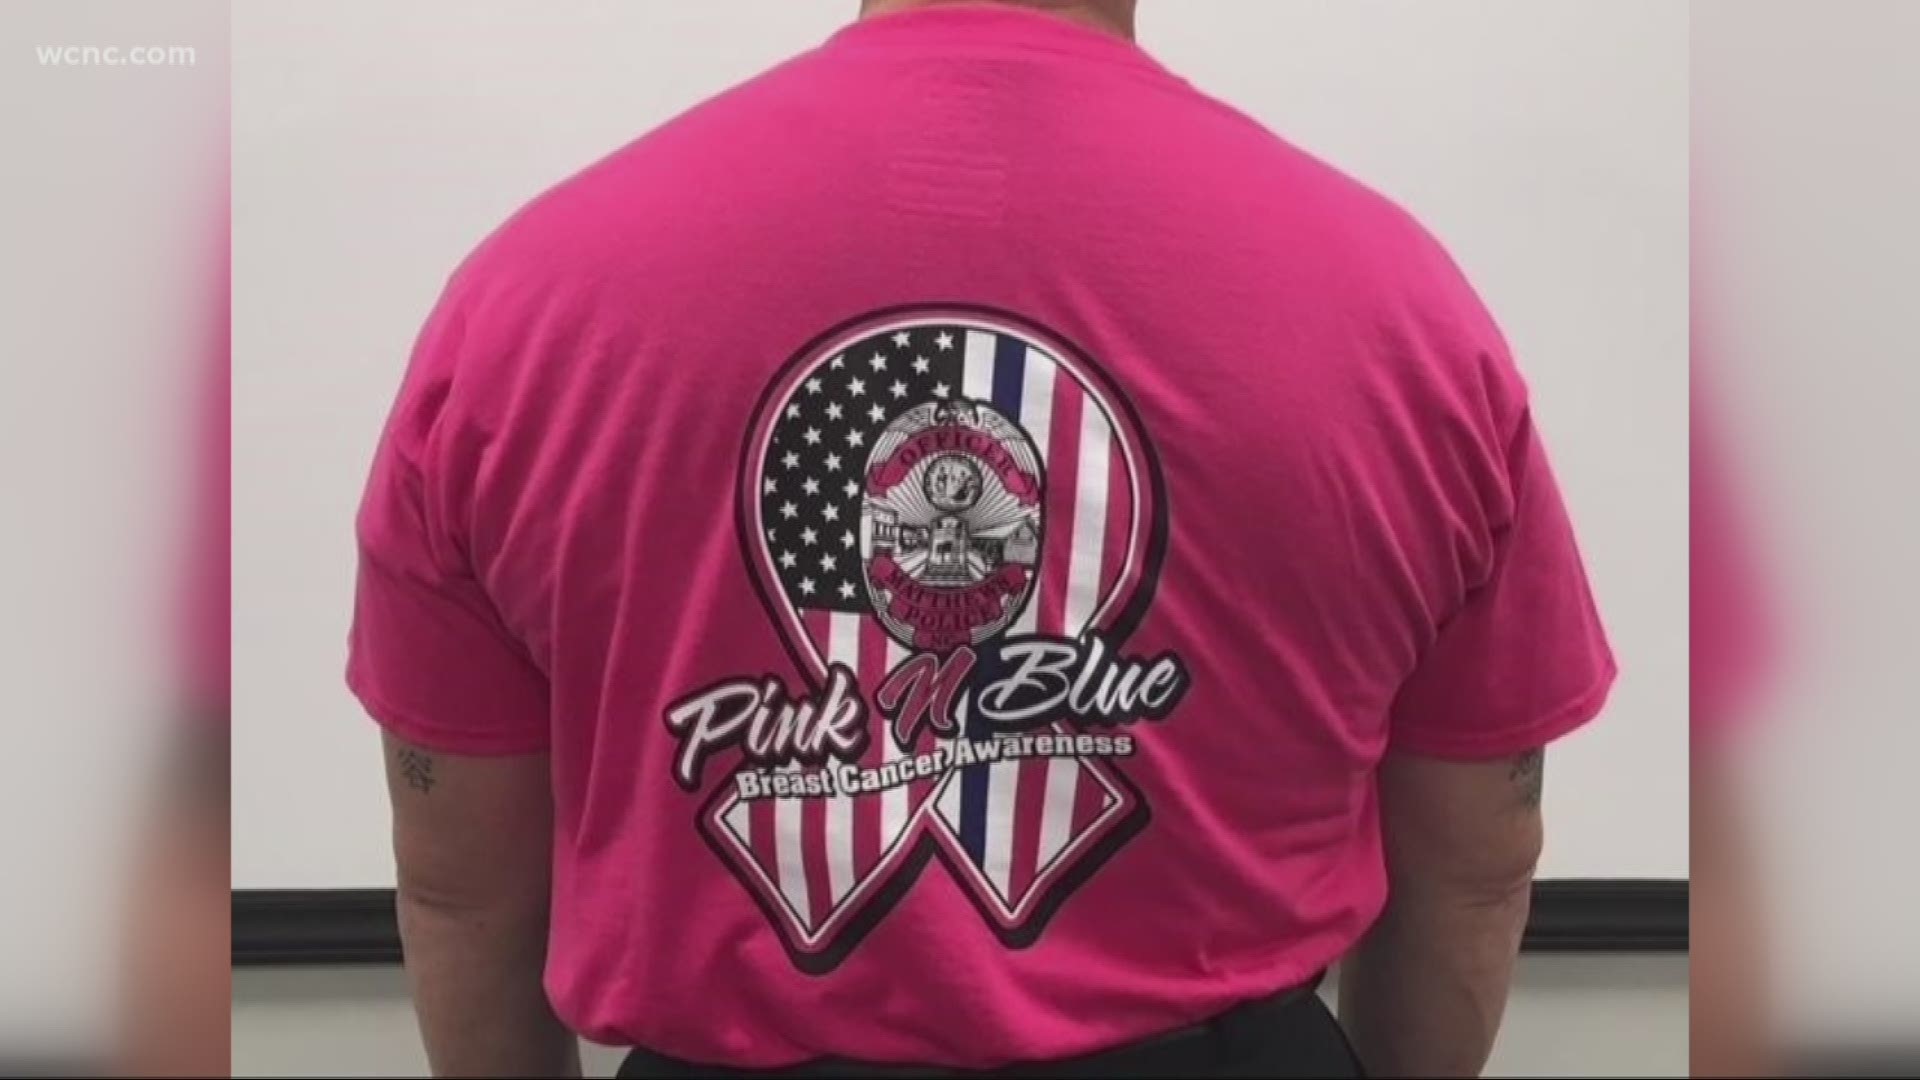 The start of October means the start of Breast Cancer Awareness Month. Some local police departments are doing their part to raise awareness and money to battle the disease.